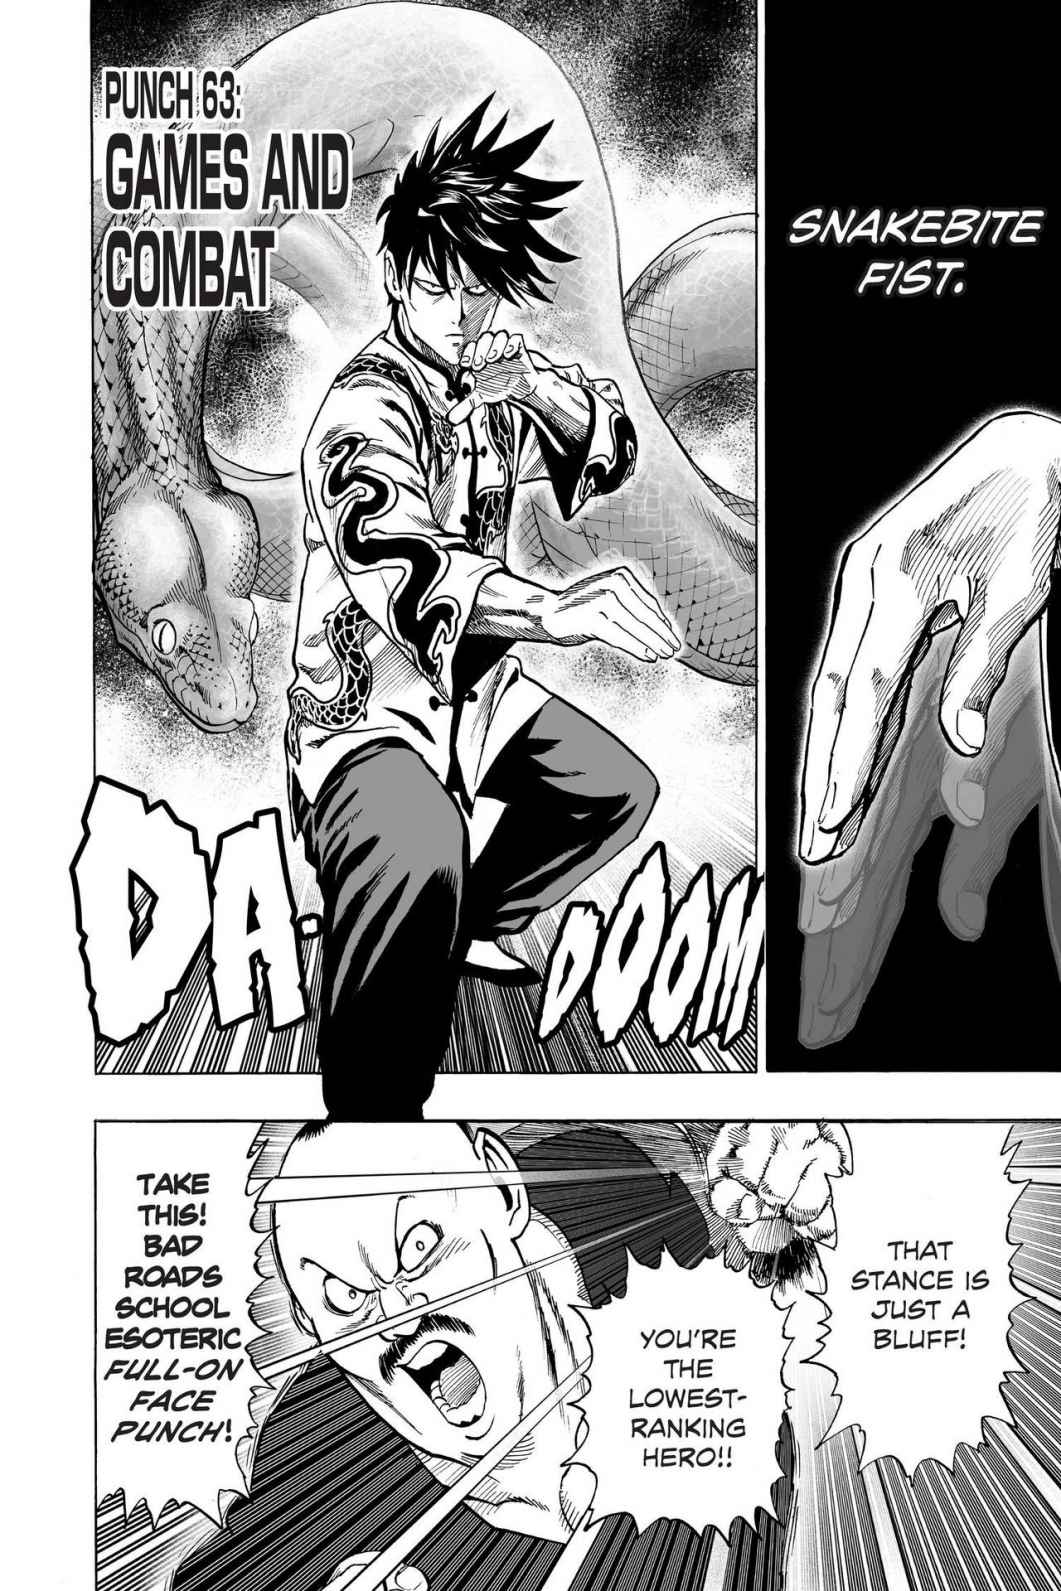 One-Punch Man, Punch 63 image 01